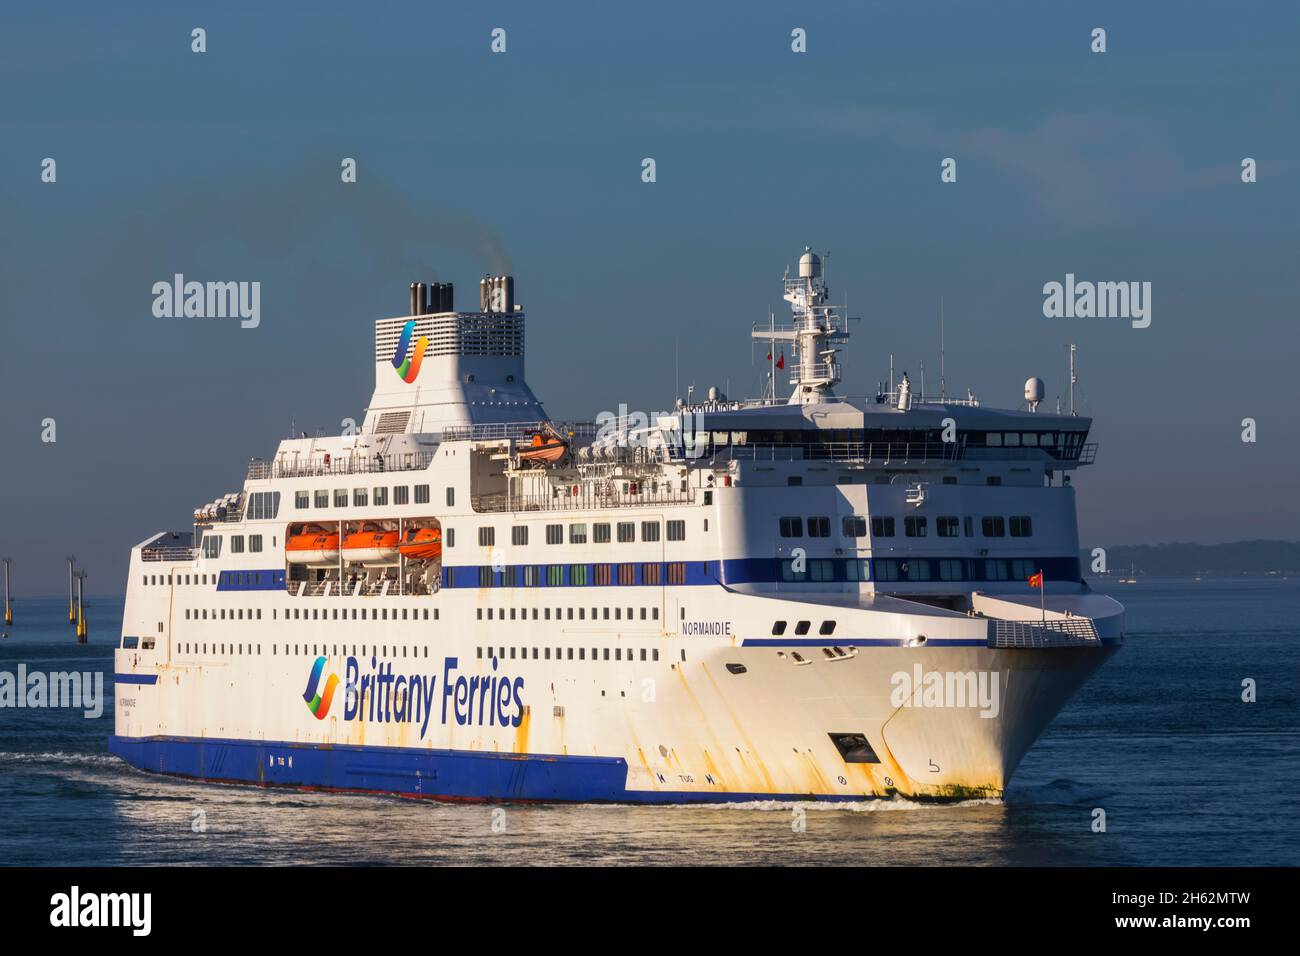 england,hampshire,portsmouth,brittany ferries ship normandie Stock Photo